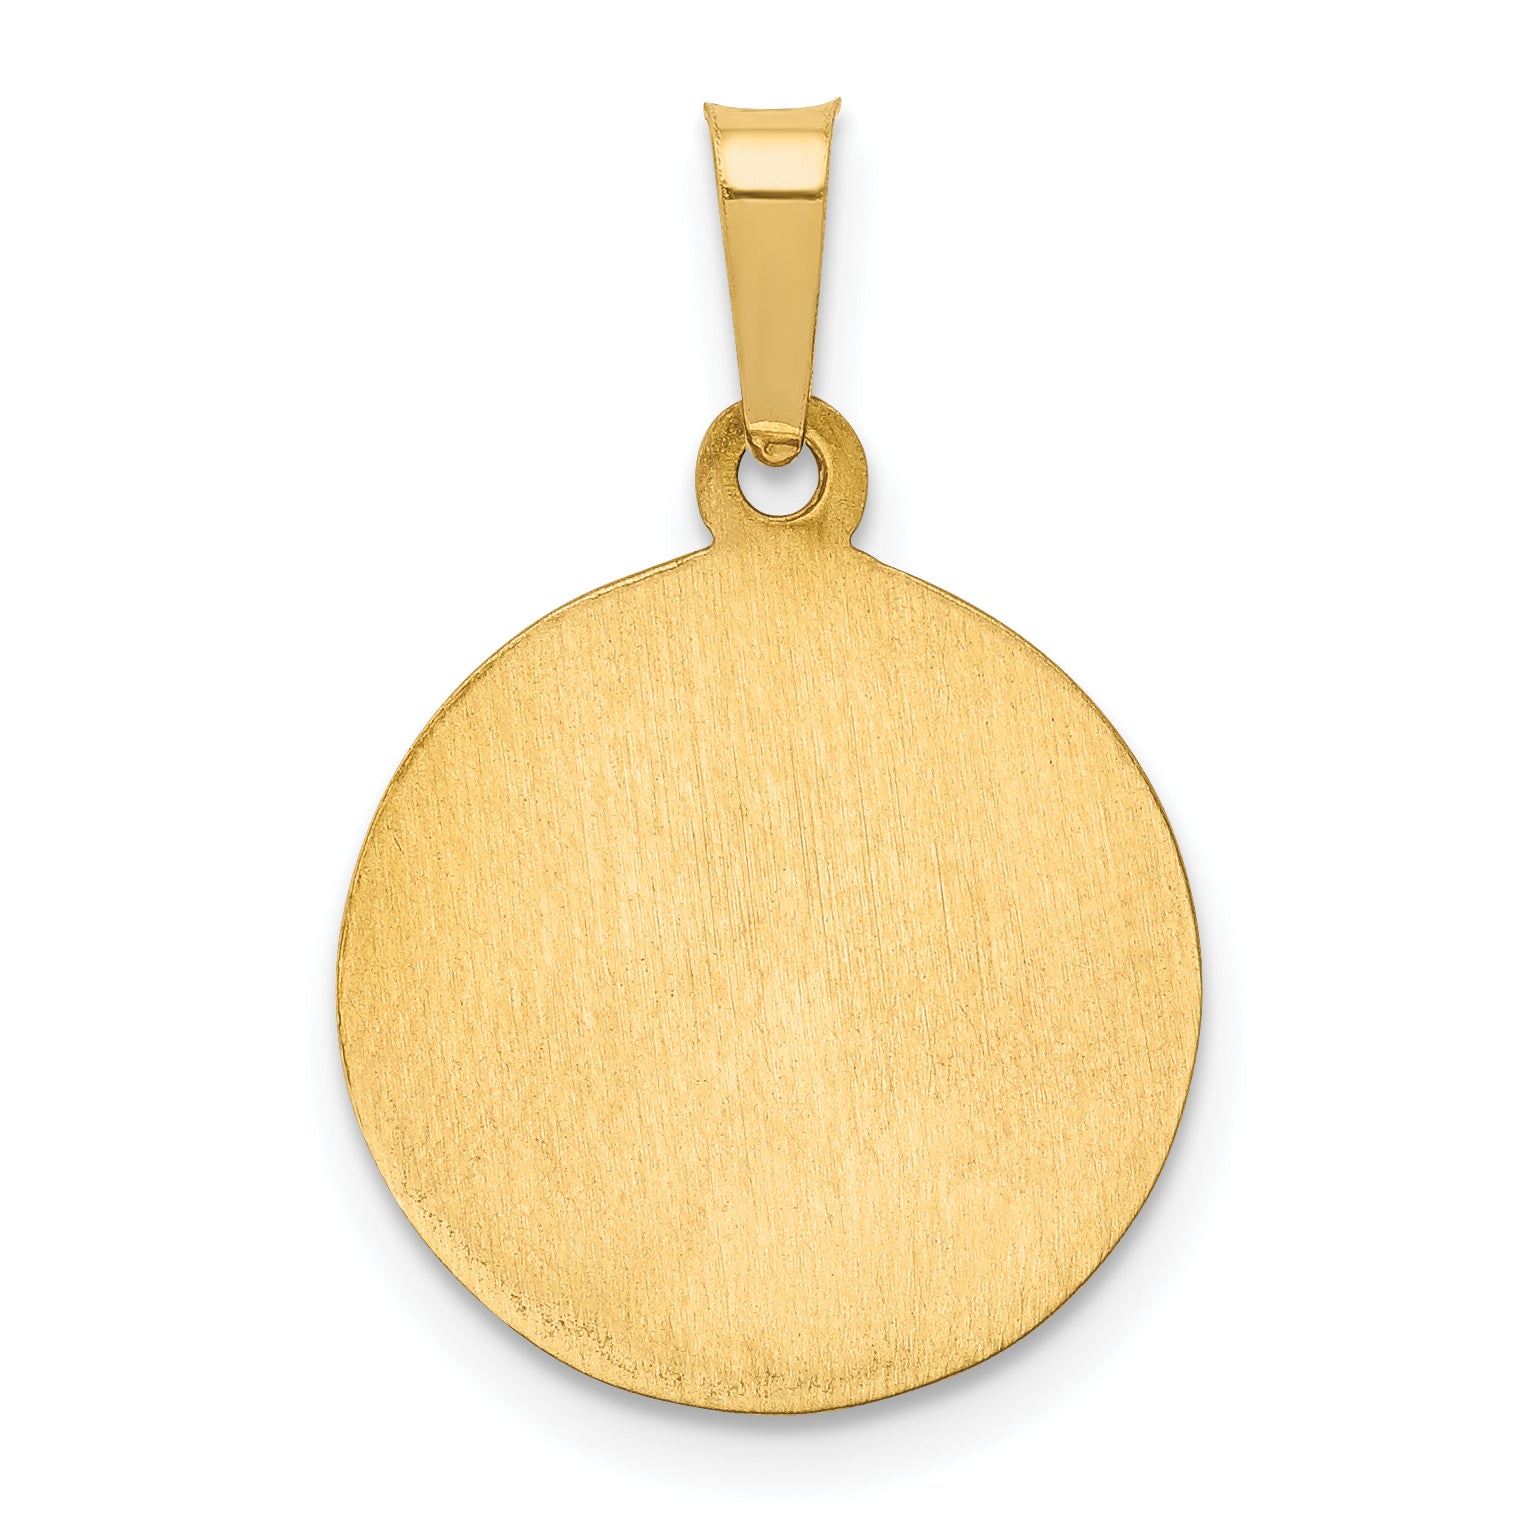 14K Polished and Satin St Peregrine Medal Hollow Pendant